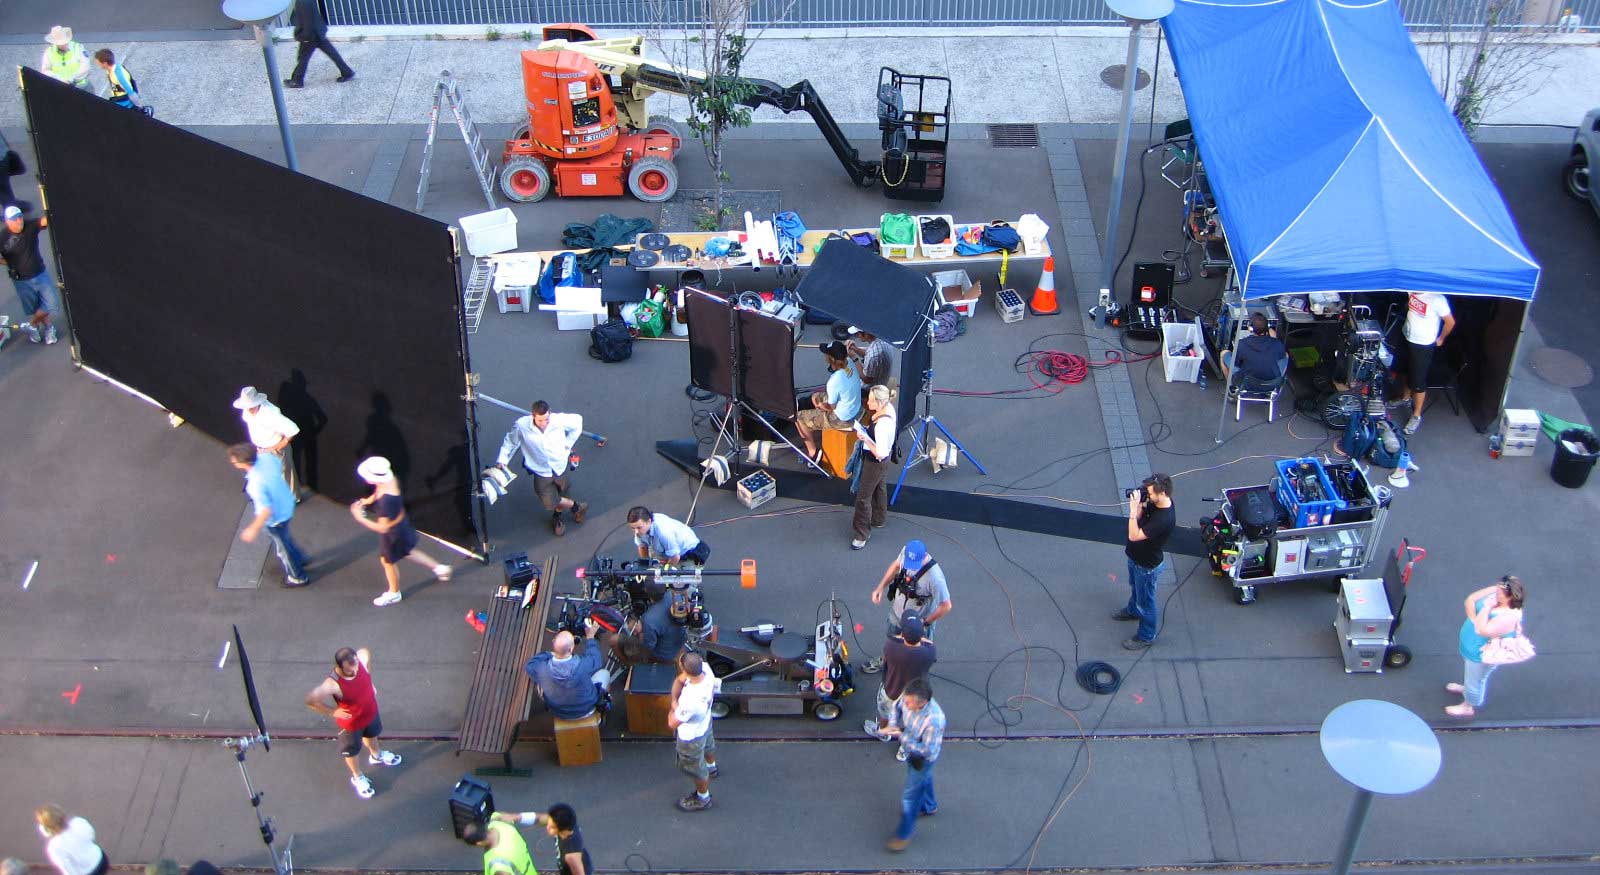 Shooting Schedule Pro Tips for a 10-Page Shoot Day - 3. Film Set On Location Catering